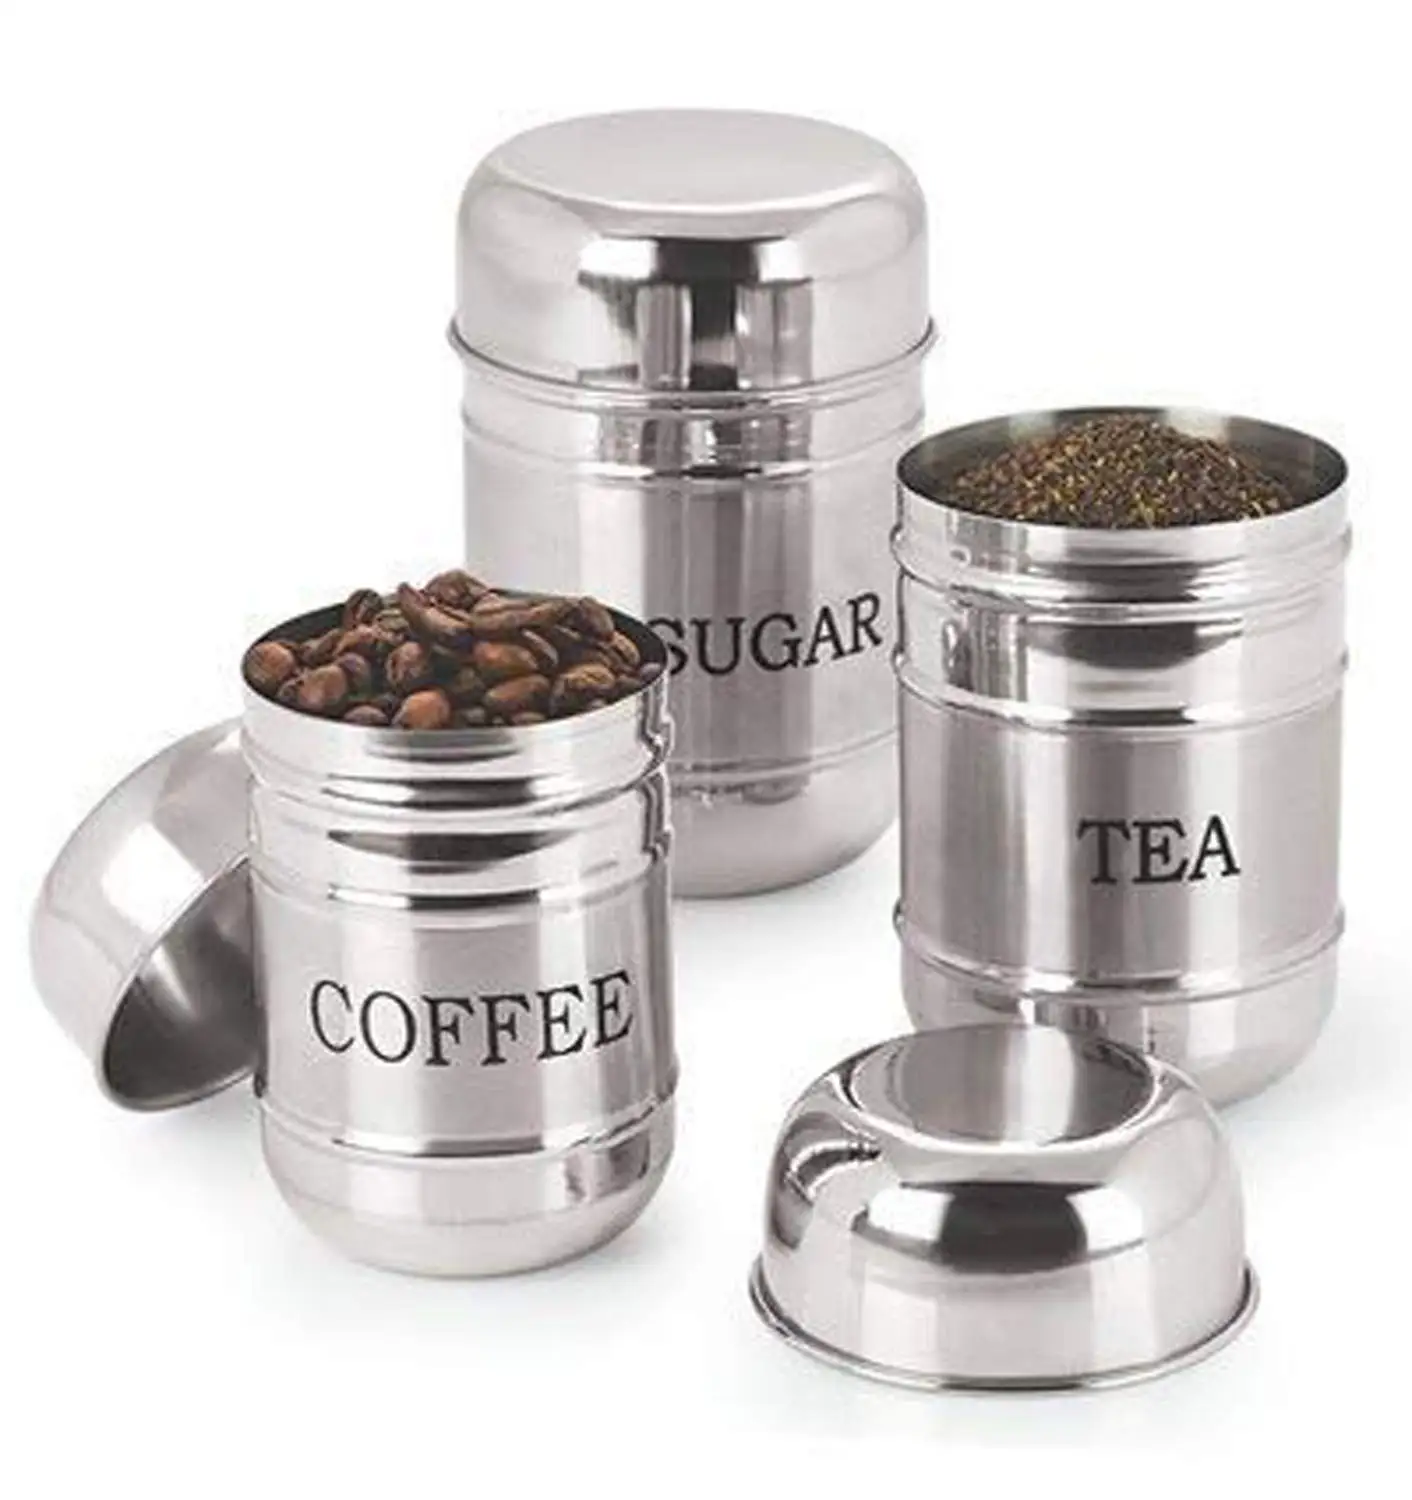 Stainless Steel Containers With Spoons Masala Dabba Spice Box ...